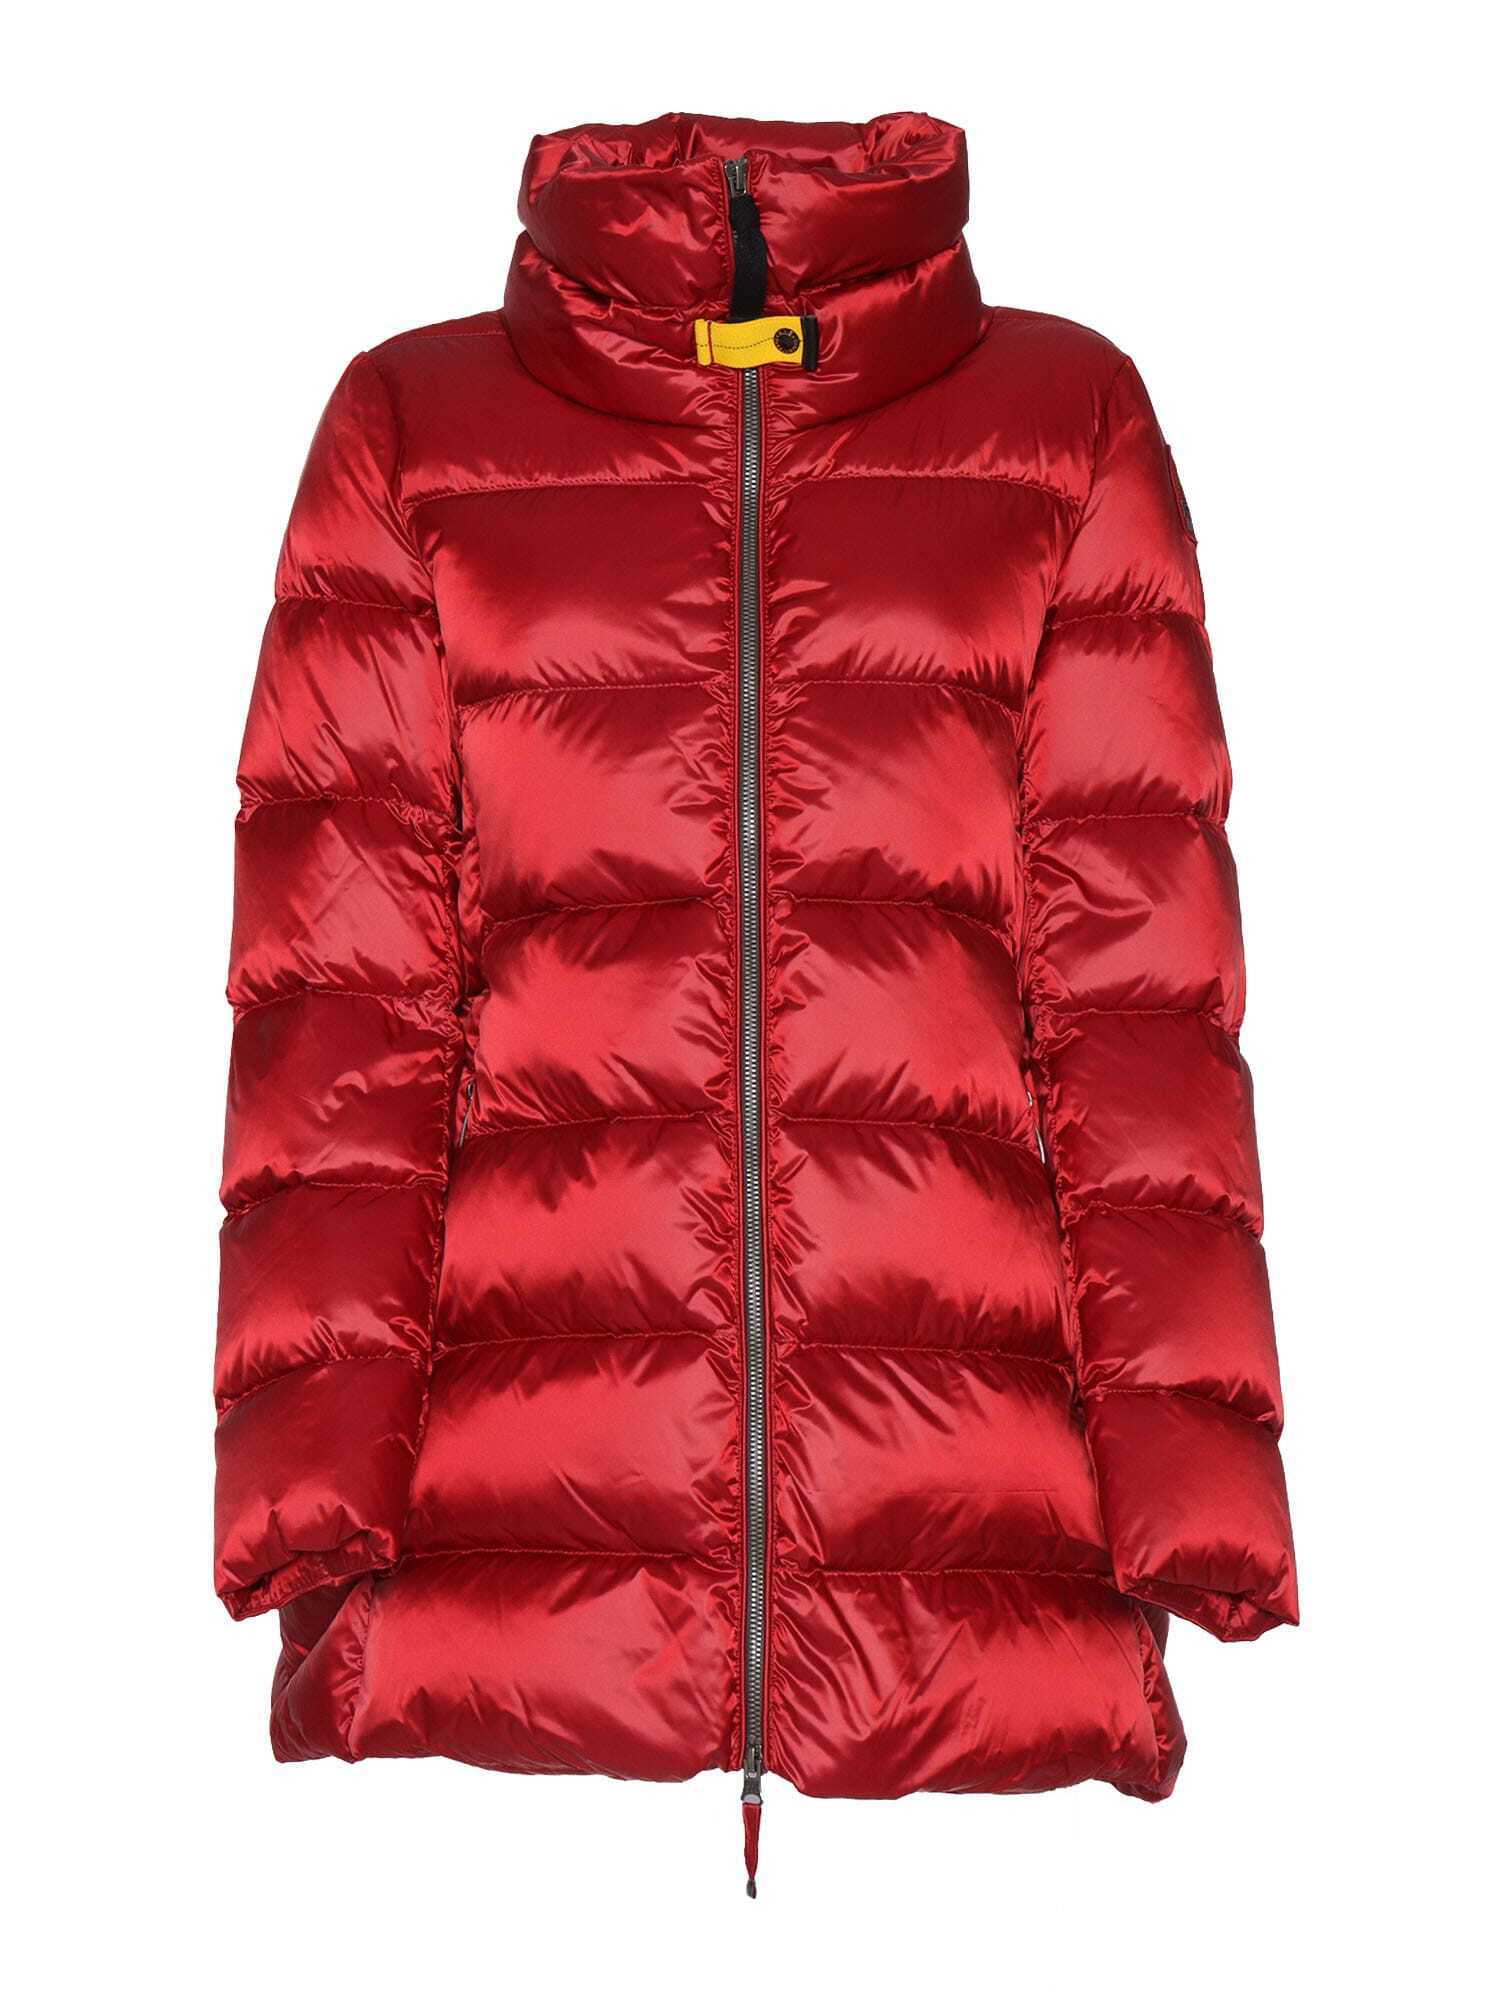 PARAJUMPERS pWp[Y bh RED WPbg fB[X H~2023 23WMPWPUSX35.0310 RIO RED y֐ŁEzybsOz ia